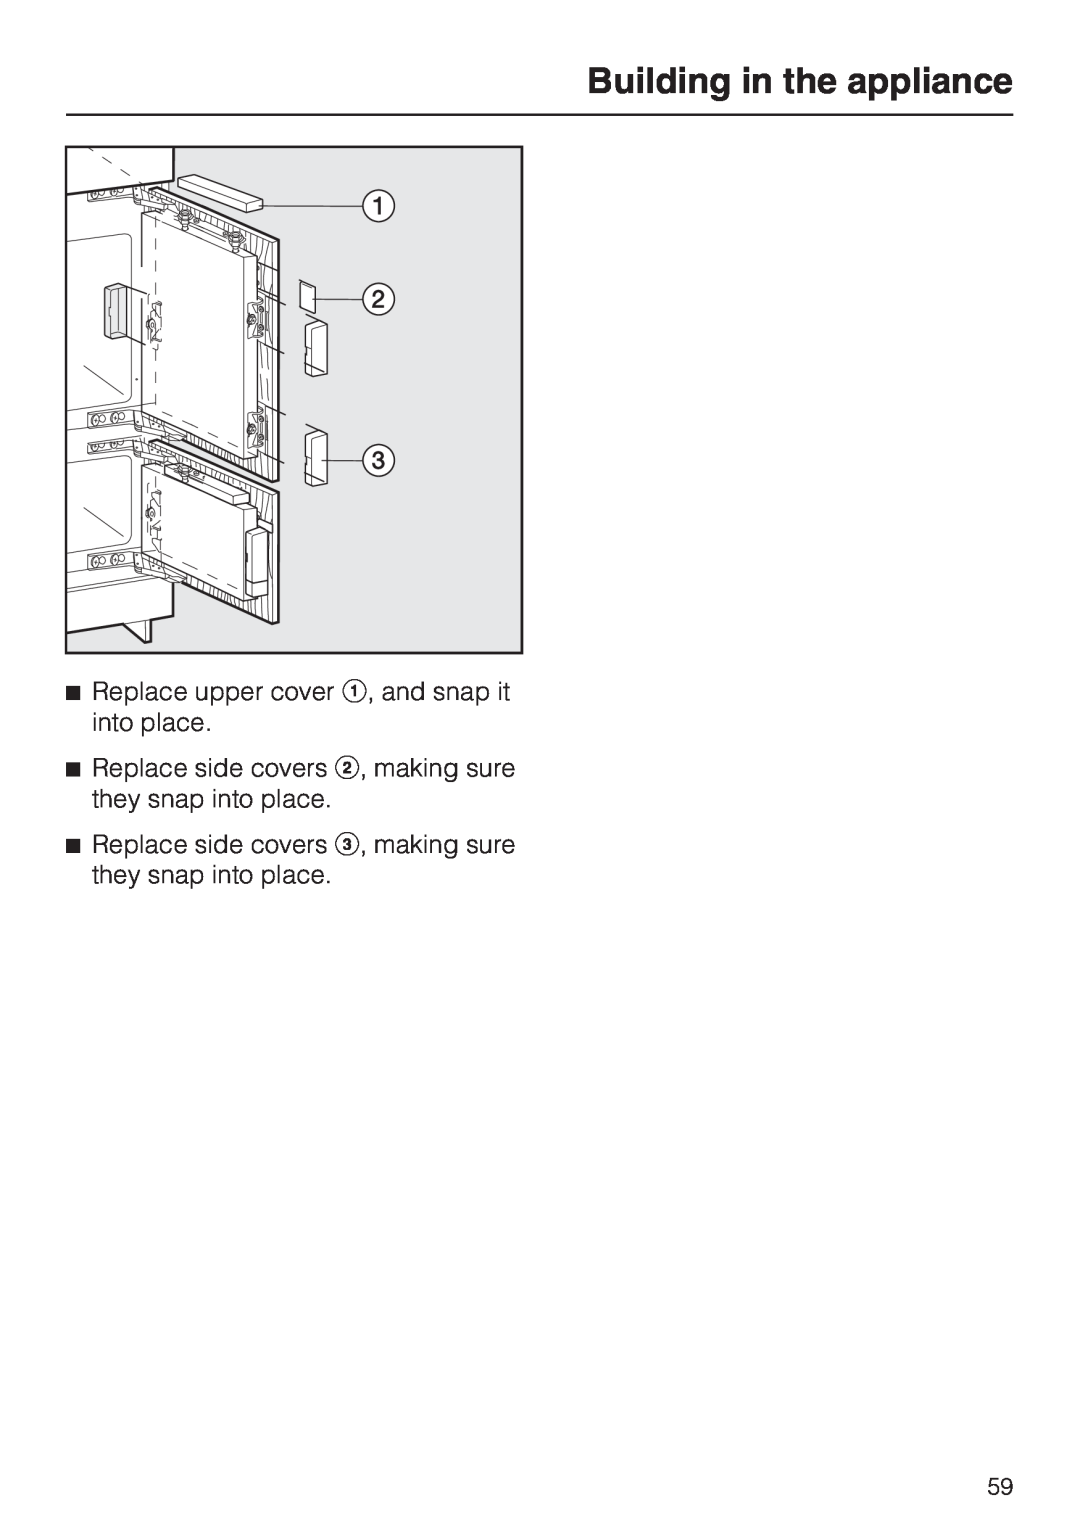 Miele KF 9757 ID installation instructions Building in the appliance, Replace upper cover a, and snap it into place 